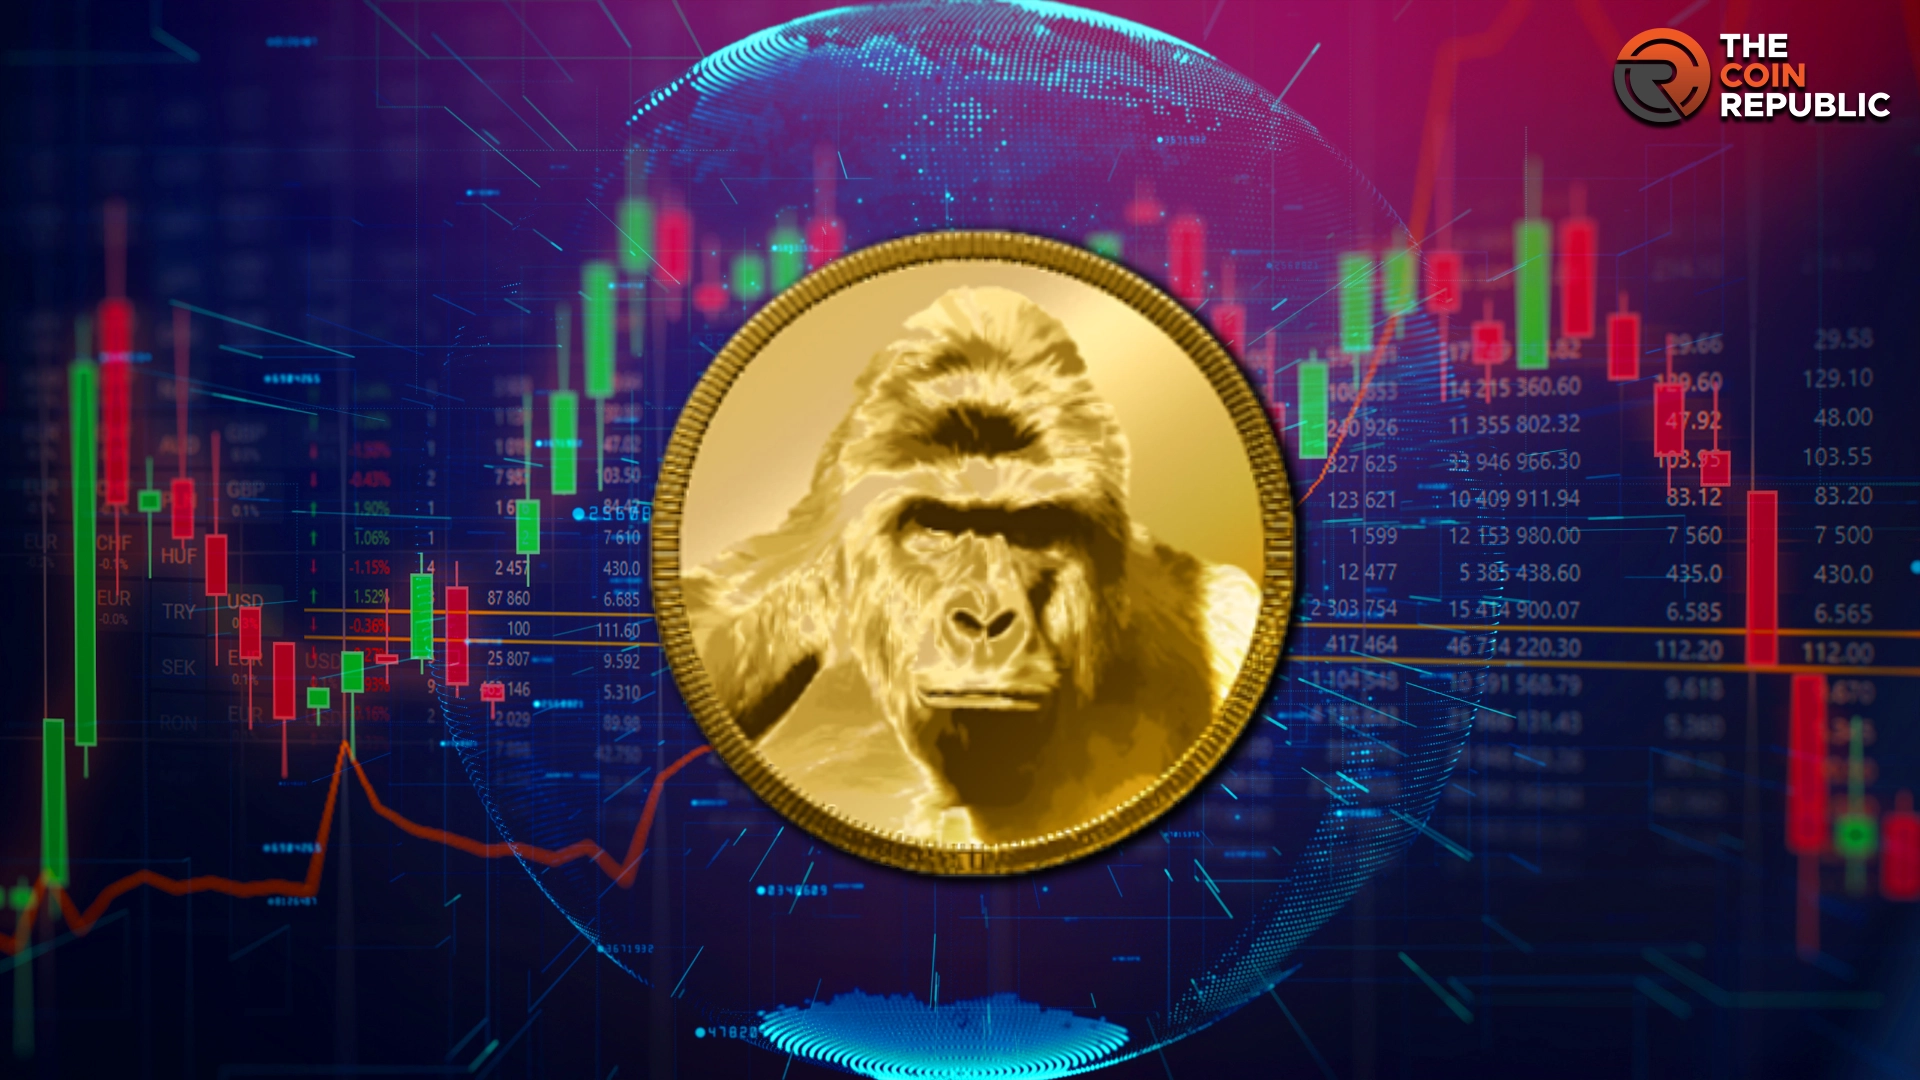 Harambe Coin: A Legacy of Memes Or A Risky Digital Gamble?